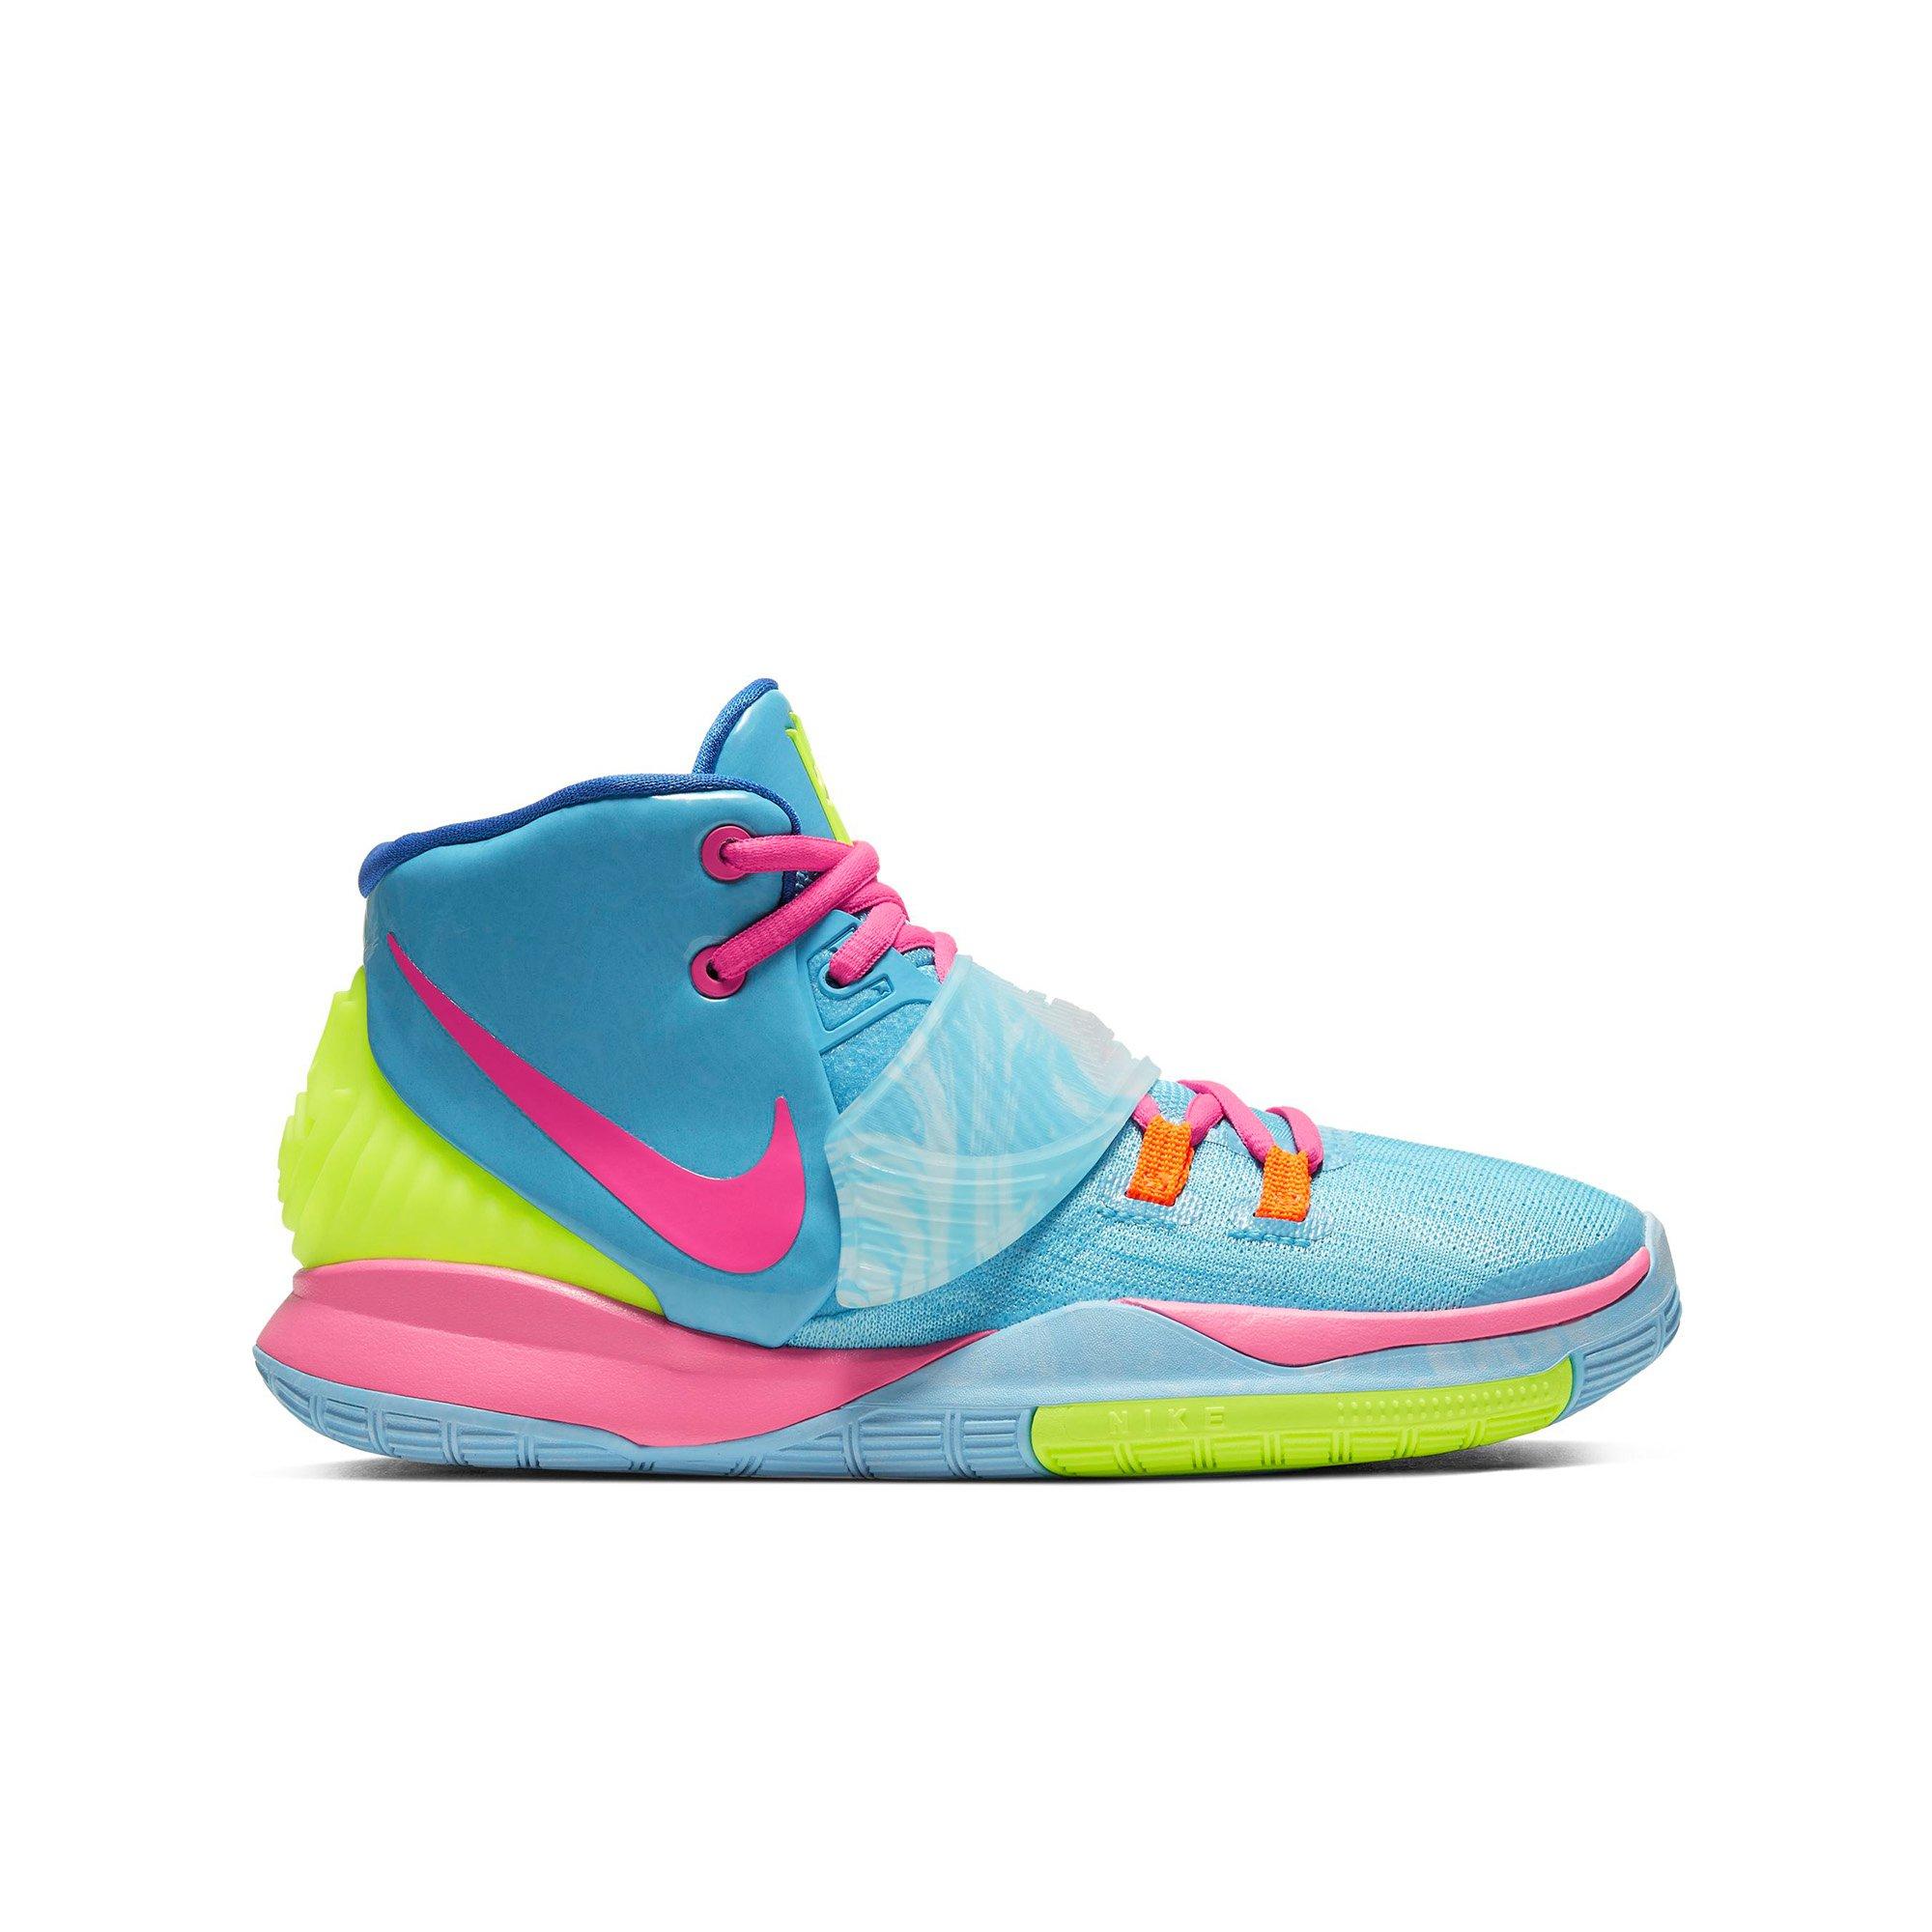 kyrie shoes for boys